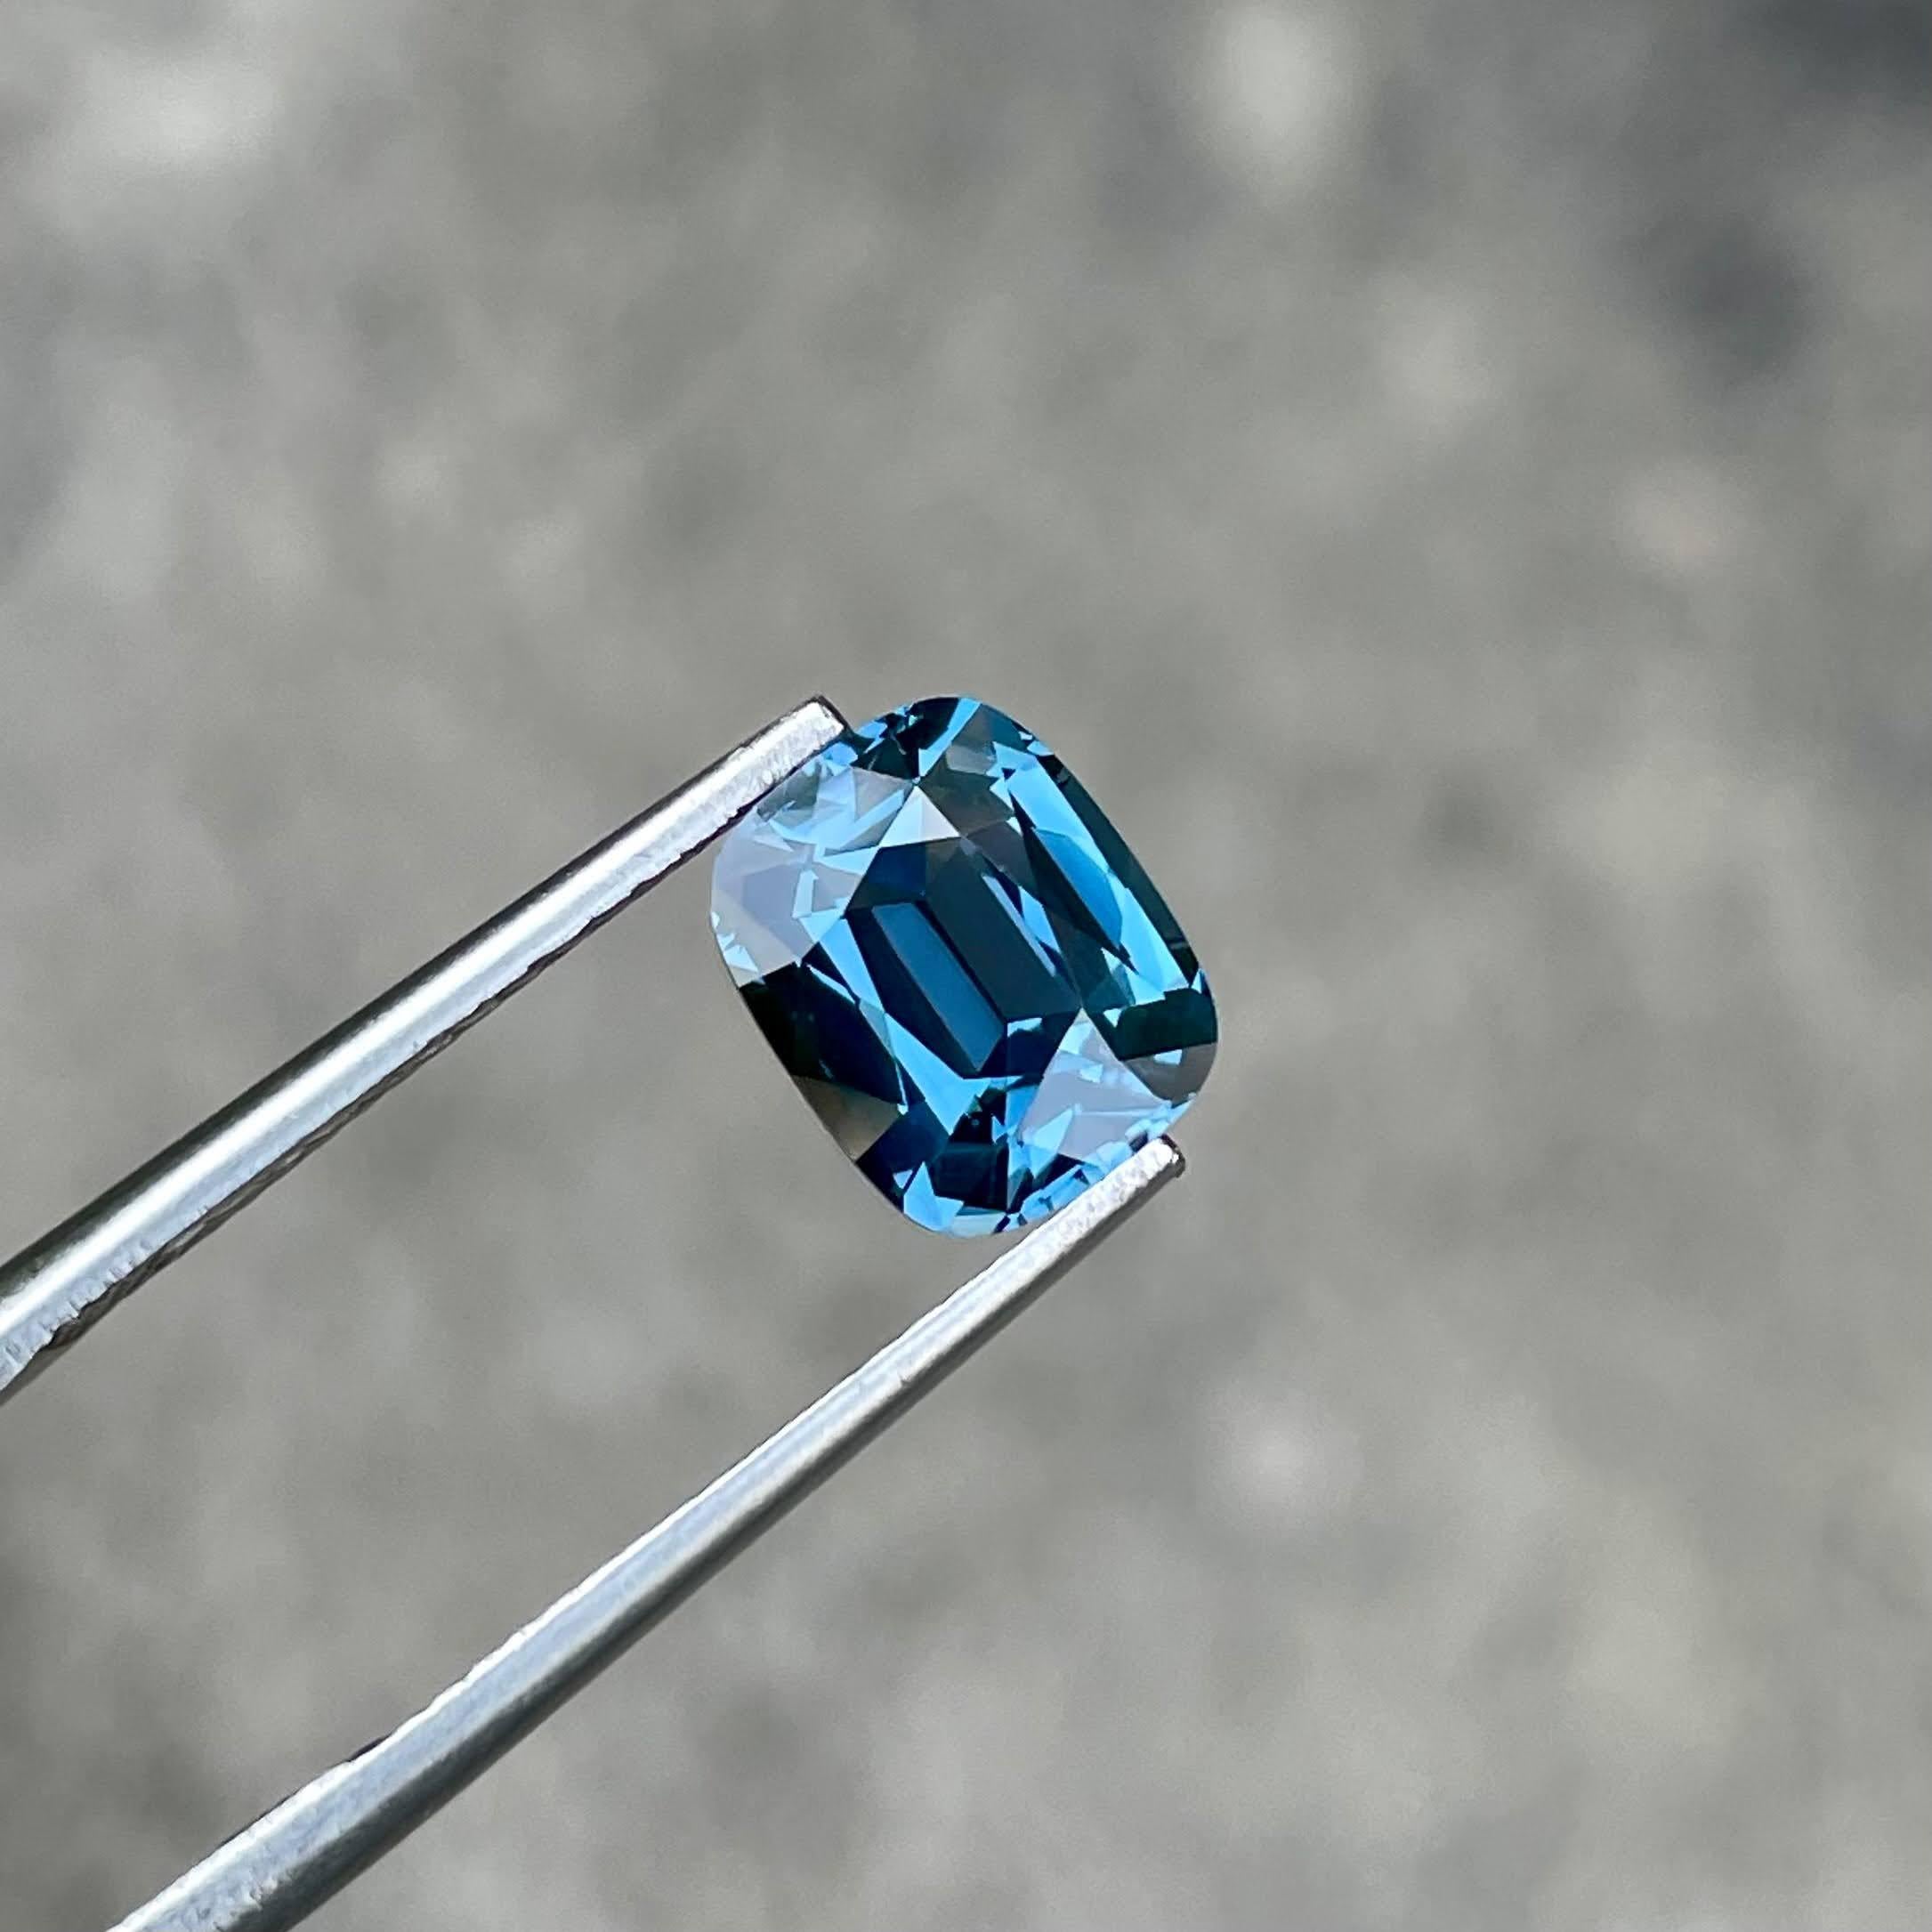 Women's or Men's 2.54 Carat Loose Blue Spinel Stone Cushion Cut Natural Tanzanian Gemstone For Sale